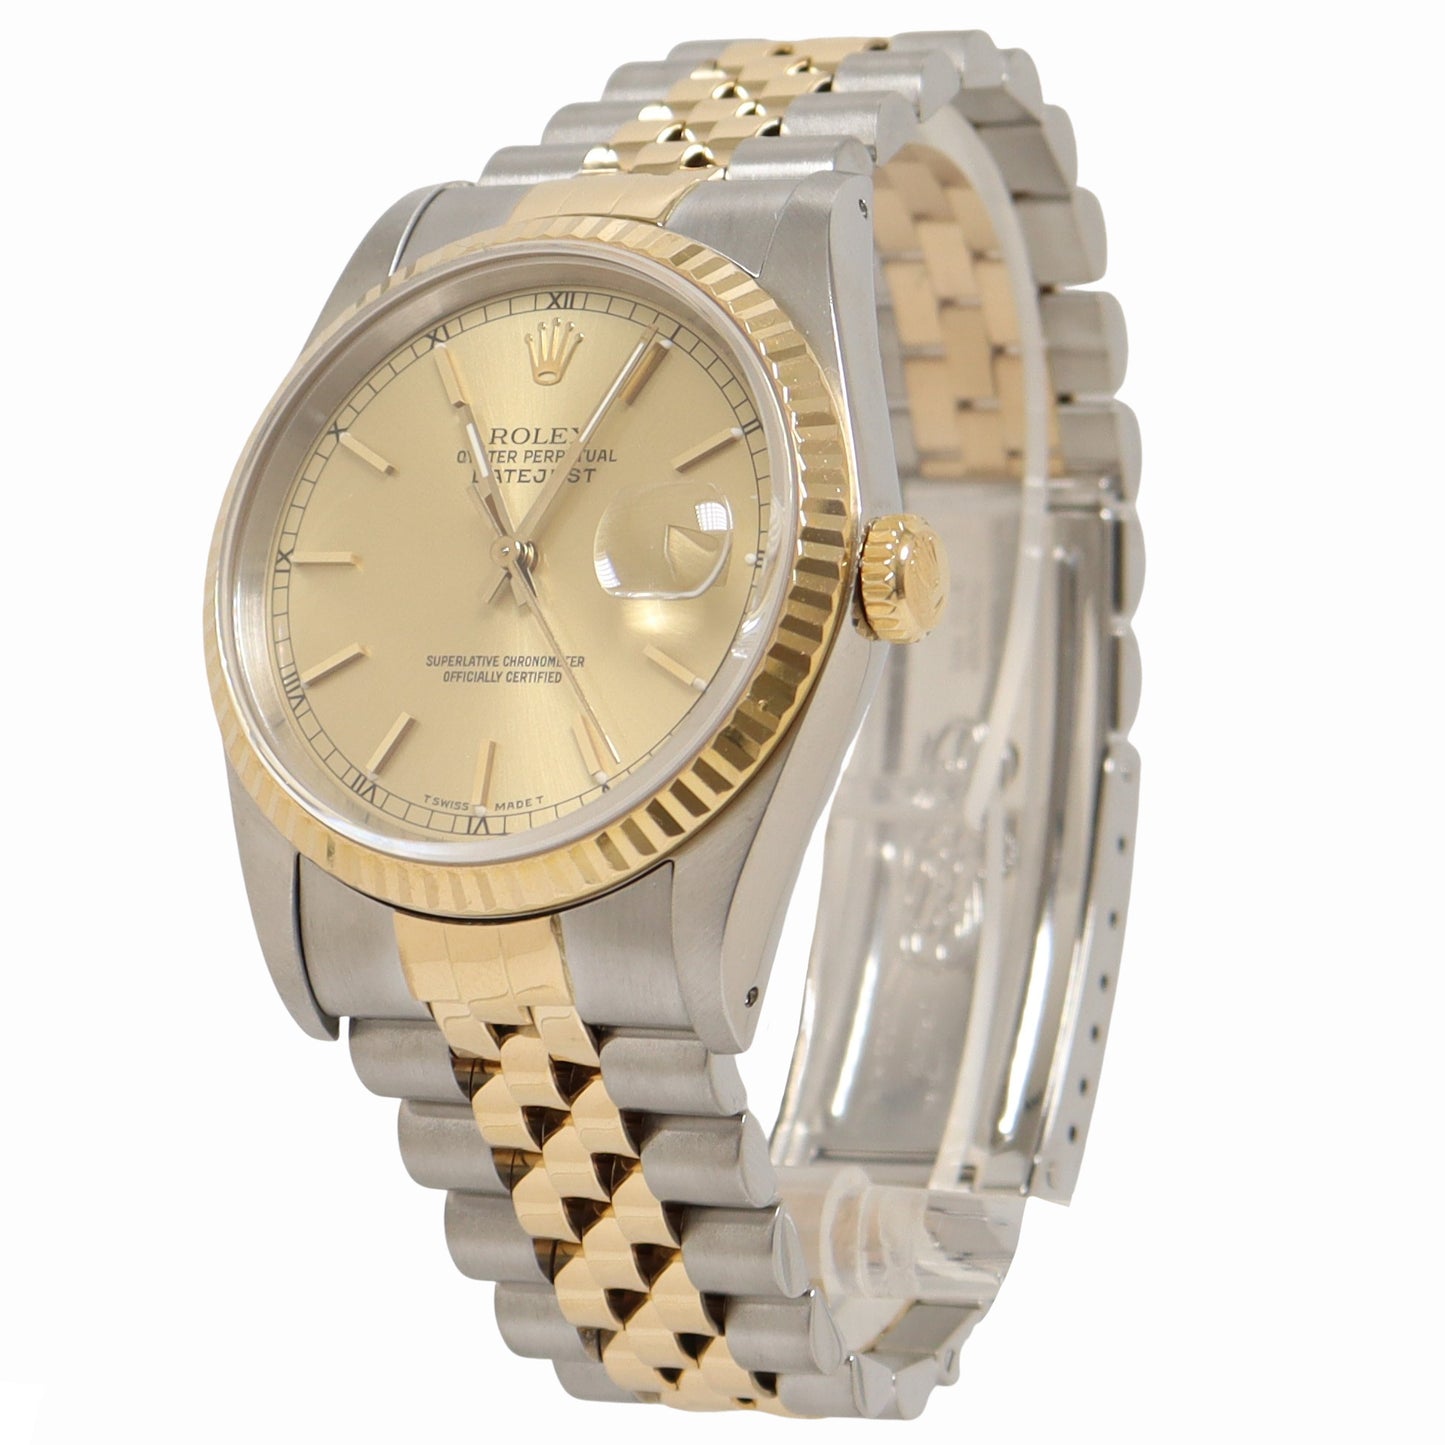 Rolex Datejust Two Tone Yellow Gold & Steel 36mm Champagne Stick Dial Watch Reference #: 16233 - Happy Jewelers Fine Jewelry Lifetime Warranty